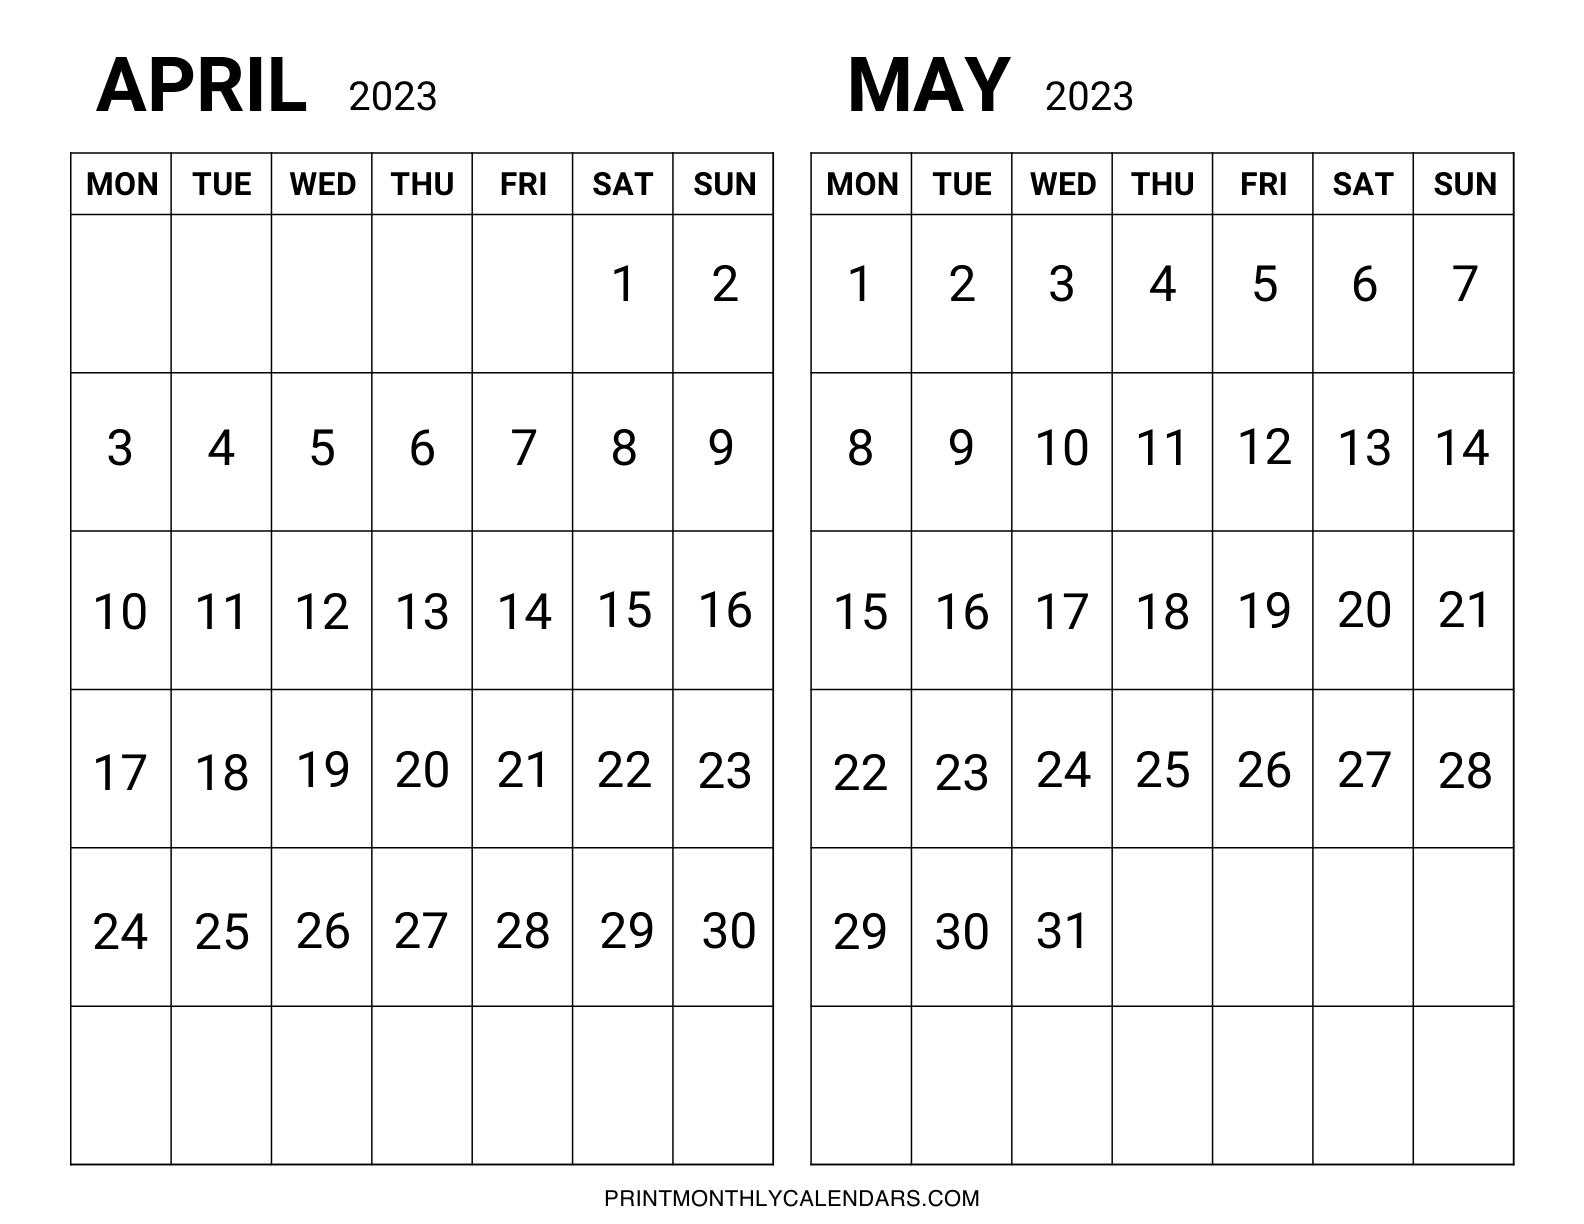 The April and May 2023 calendar template is set out in landscape style, with weekdays beginning on Monday. The bold monthly dates are printed in grids, with blank space for noting important events.